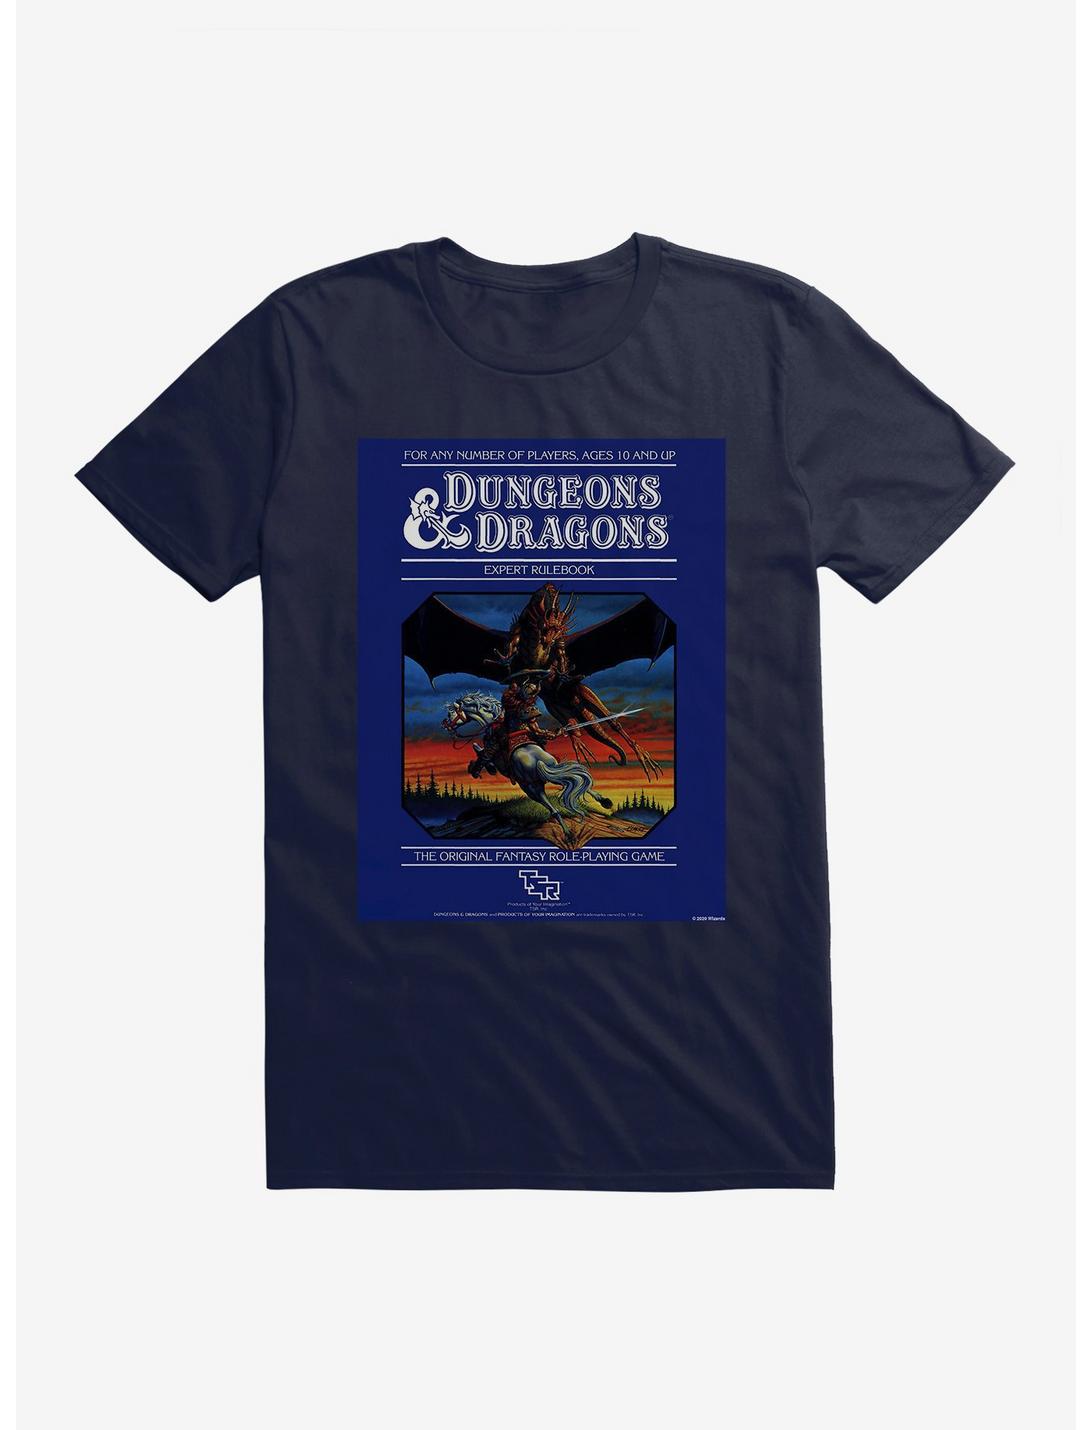 Dungeons & Dragons Expert Rulebook Set Two T-Shirt, NAVY, hi-res